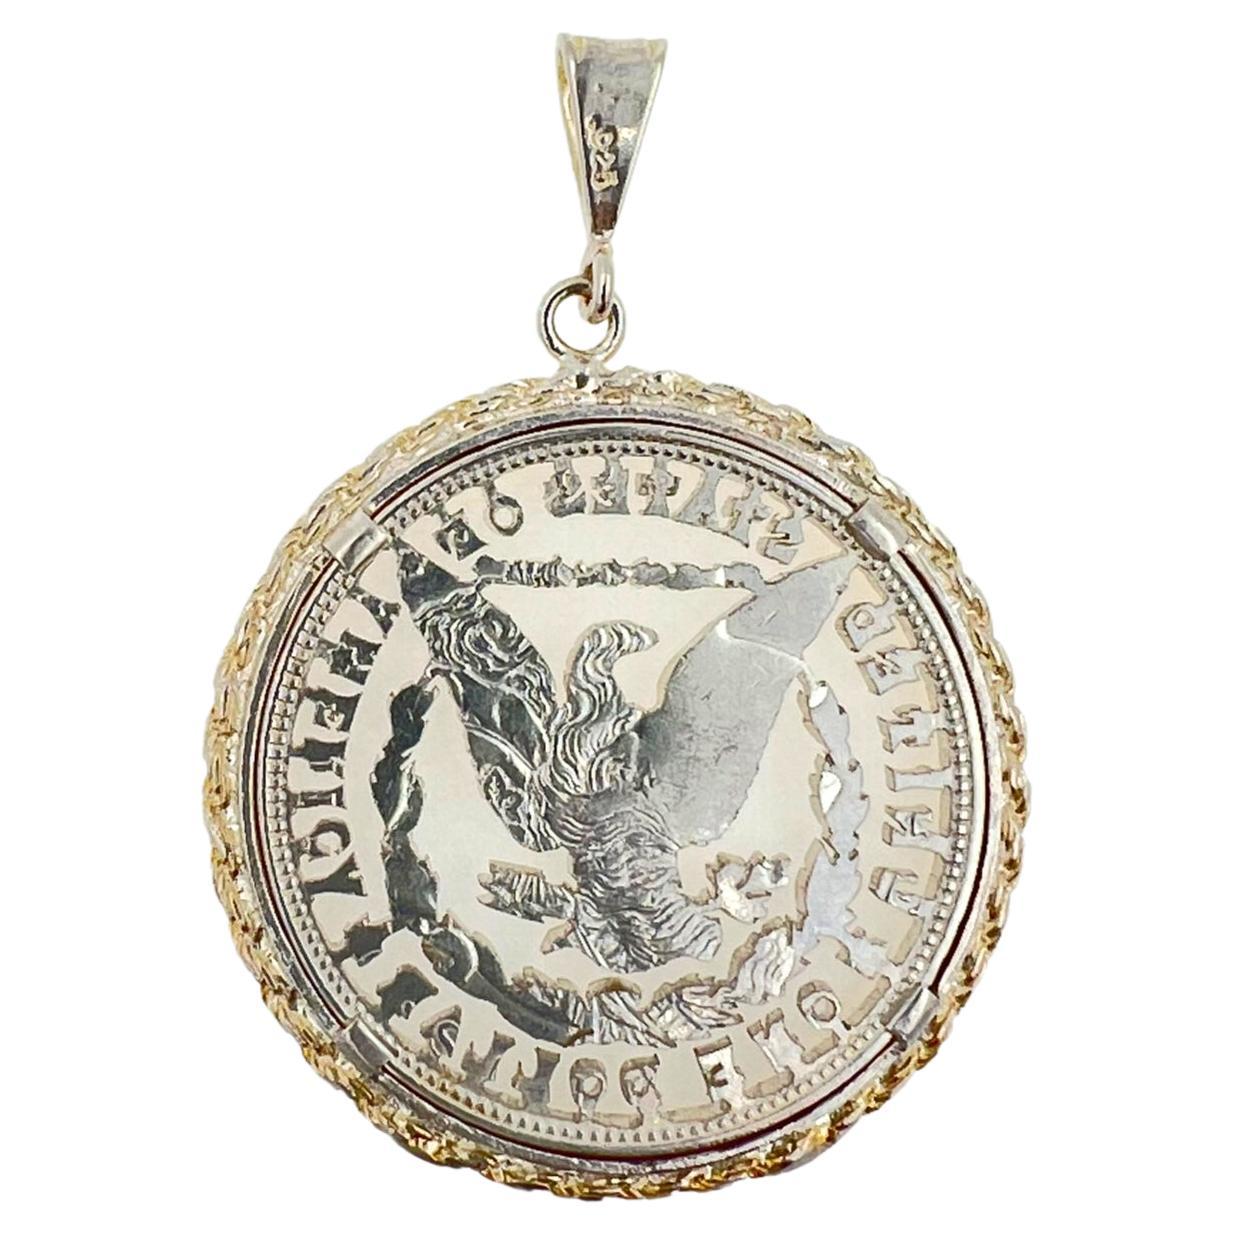 925 Solid Sterling Silver 
45 mm in coin diameter
Genuine Vintage Coin (Carved) 
Pendant Only
Crafted & Unique
Great Value